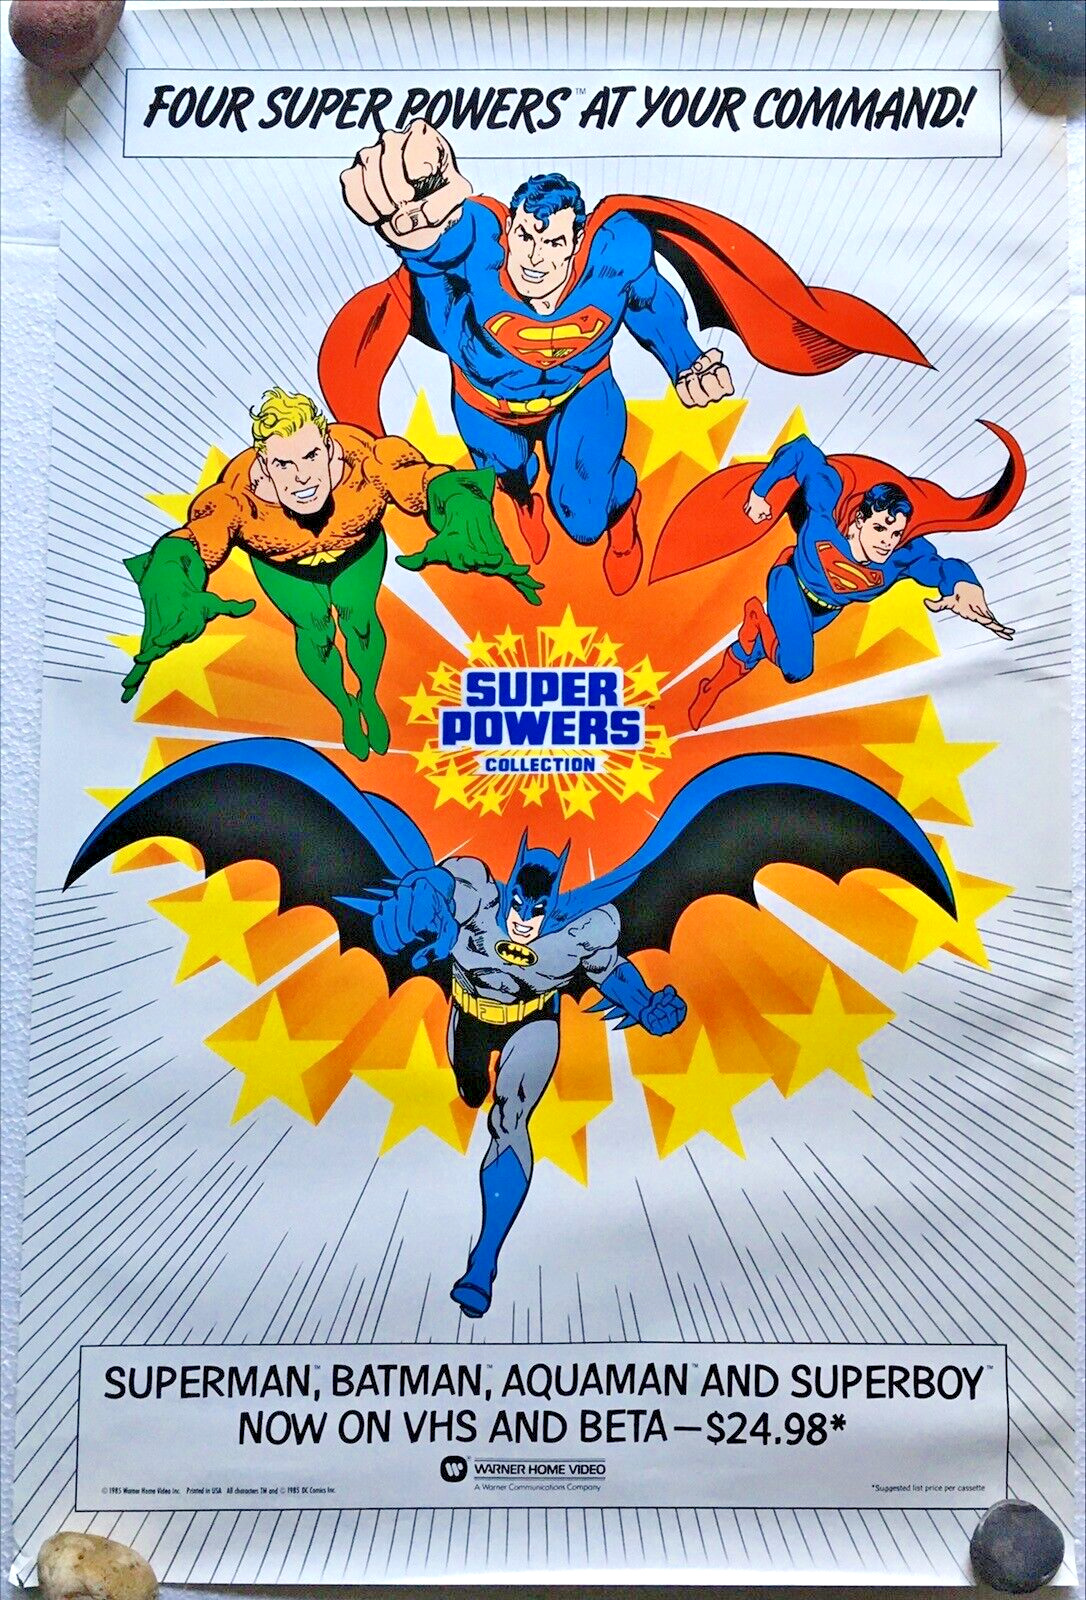 Vintage 1985 DC Super Powers Collection - Warner VHS Beta Promo Poster 20 x 30